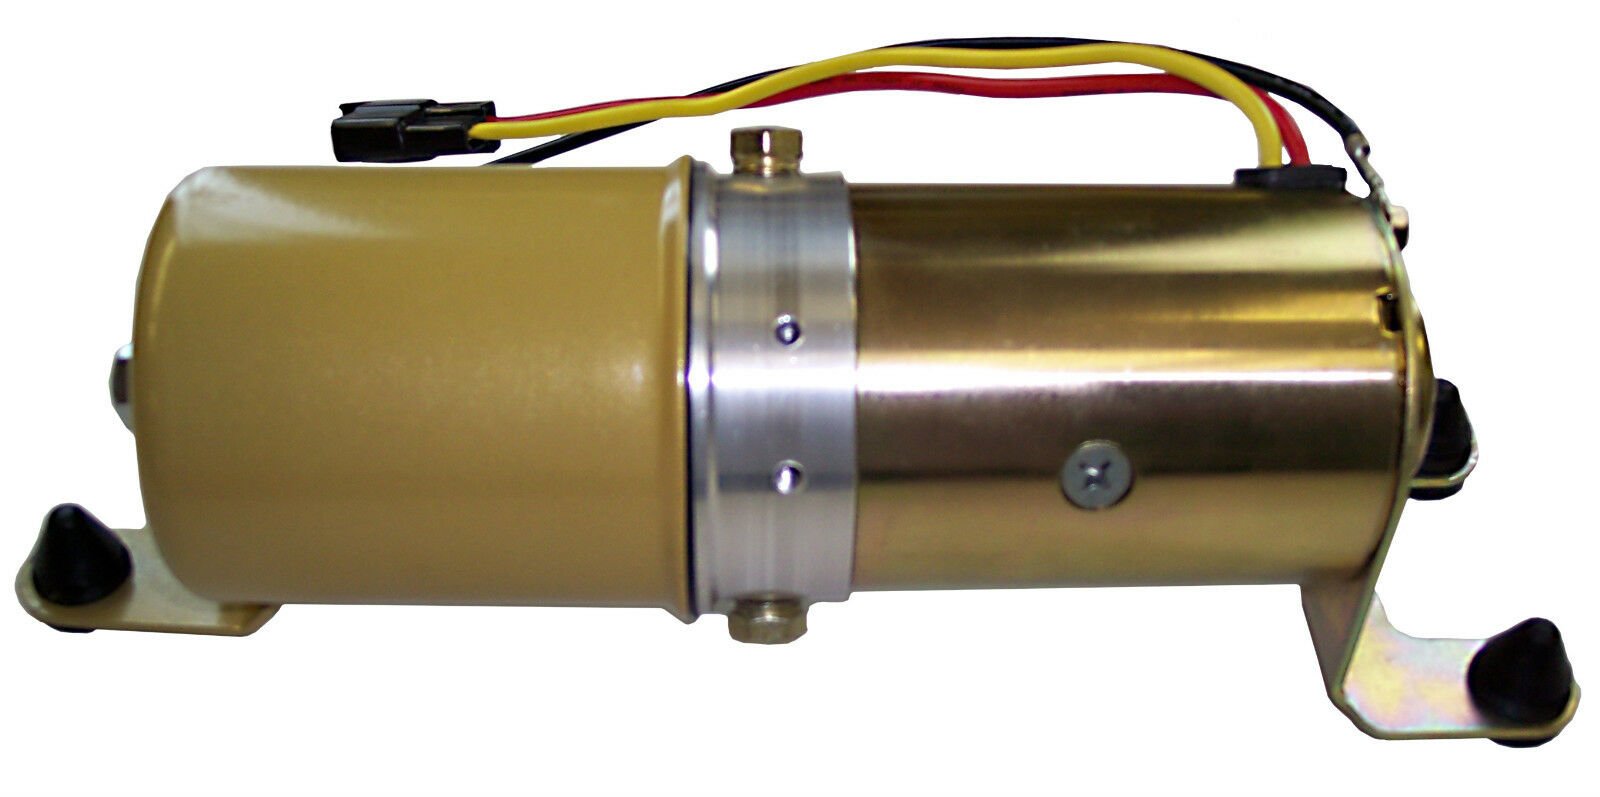 1965-1970 Chevrolet Impala, Ss New Direct Fit Convertible Top Pump Motor